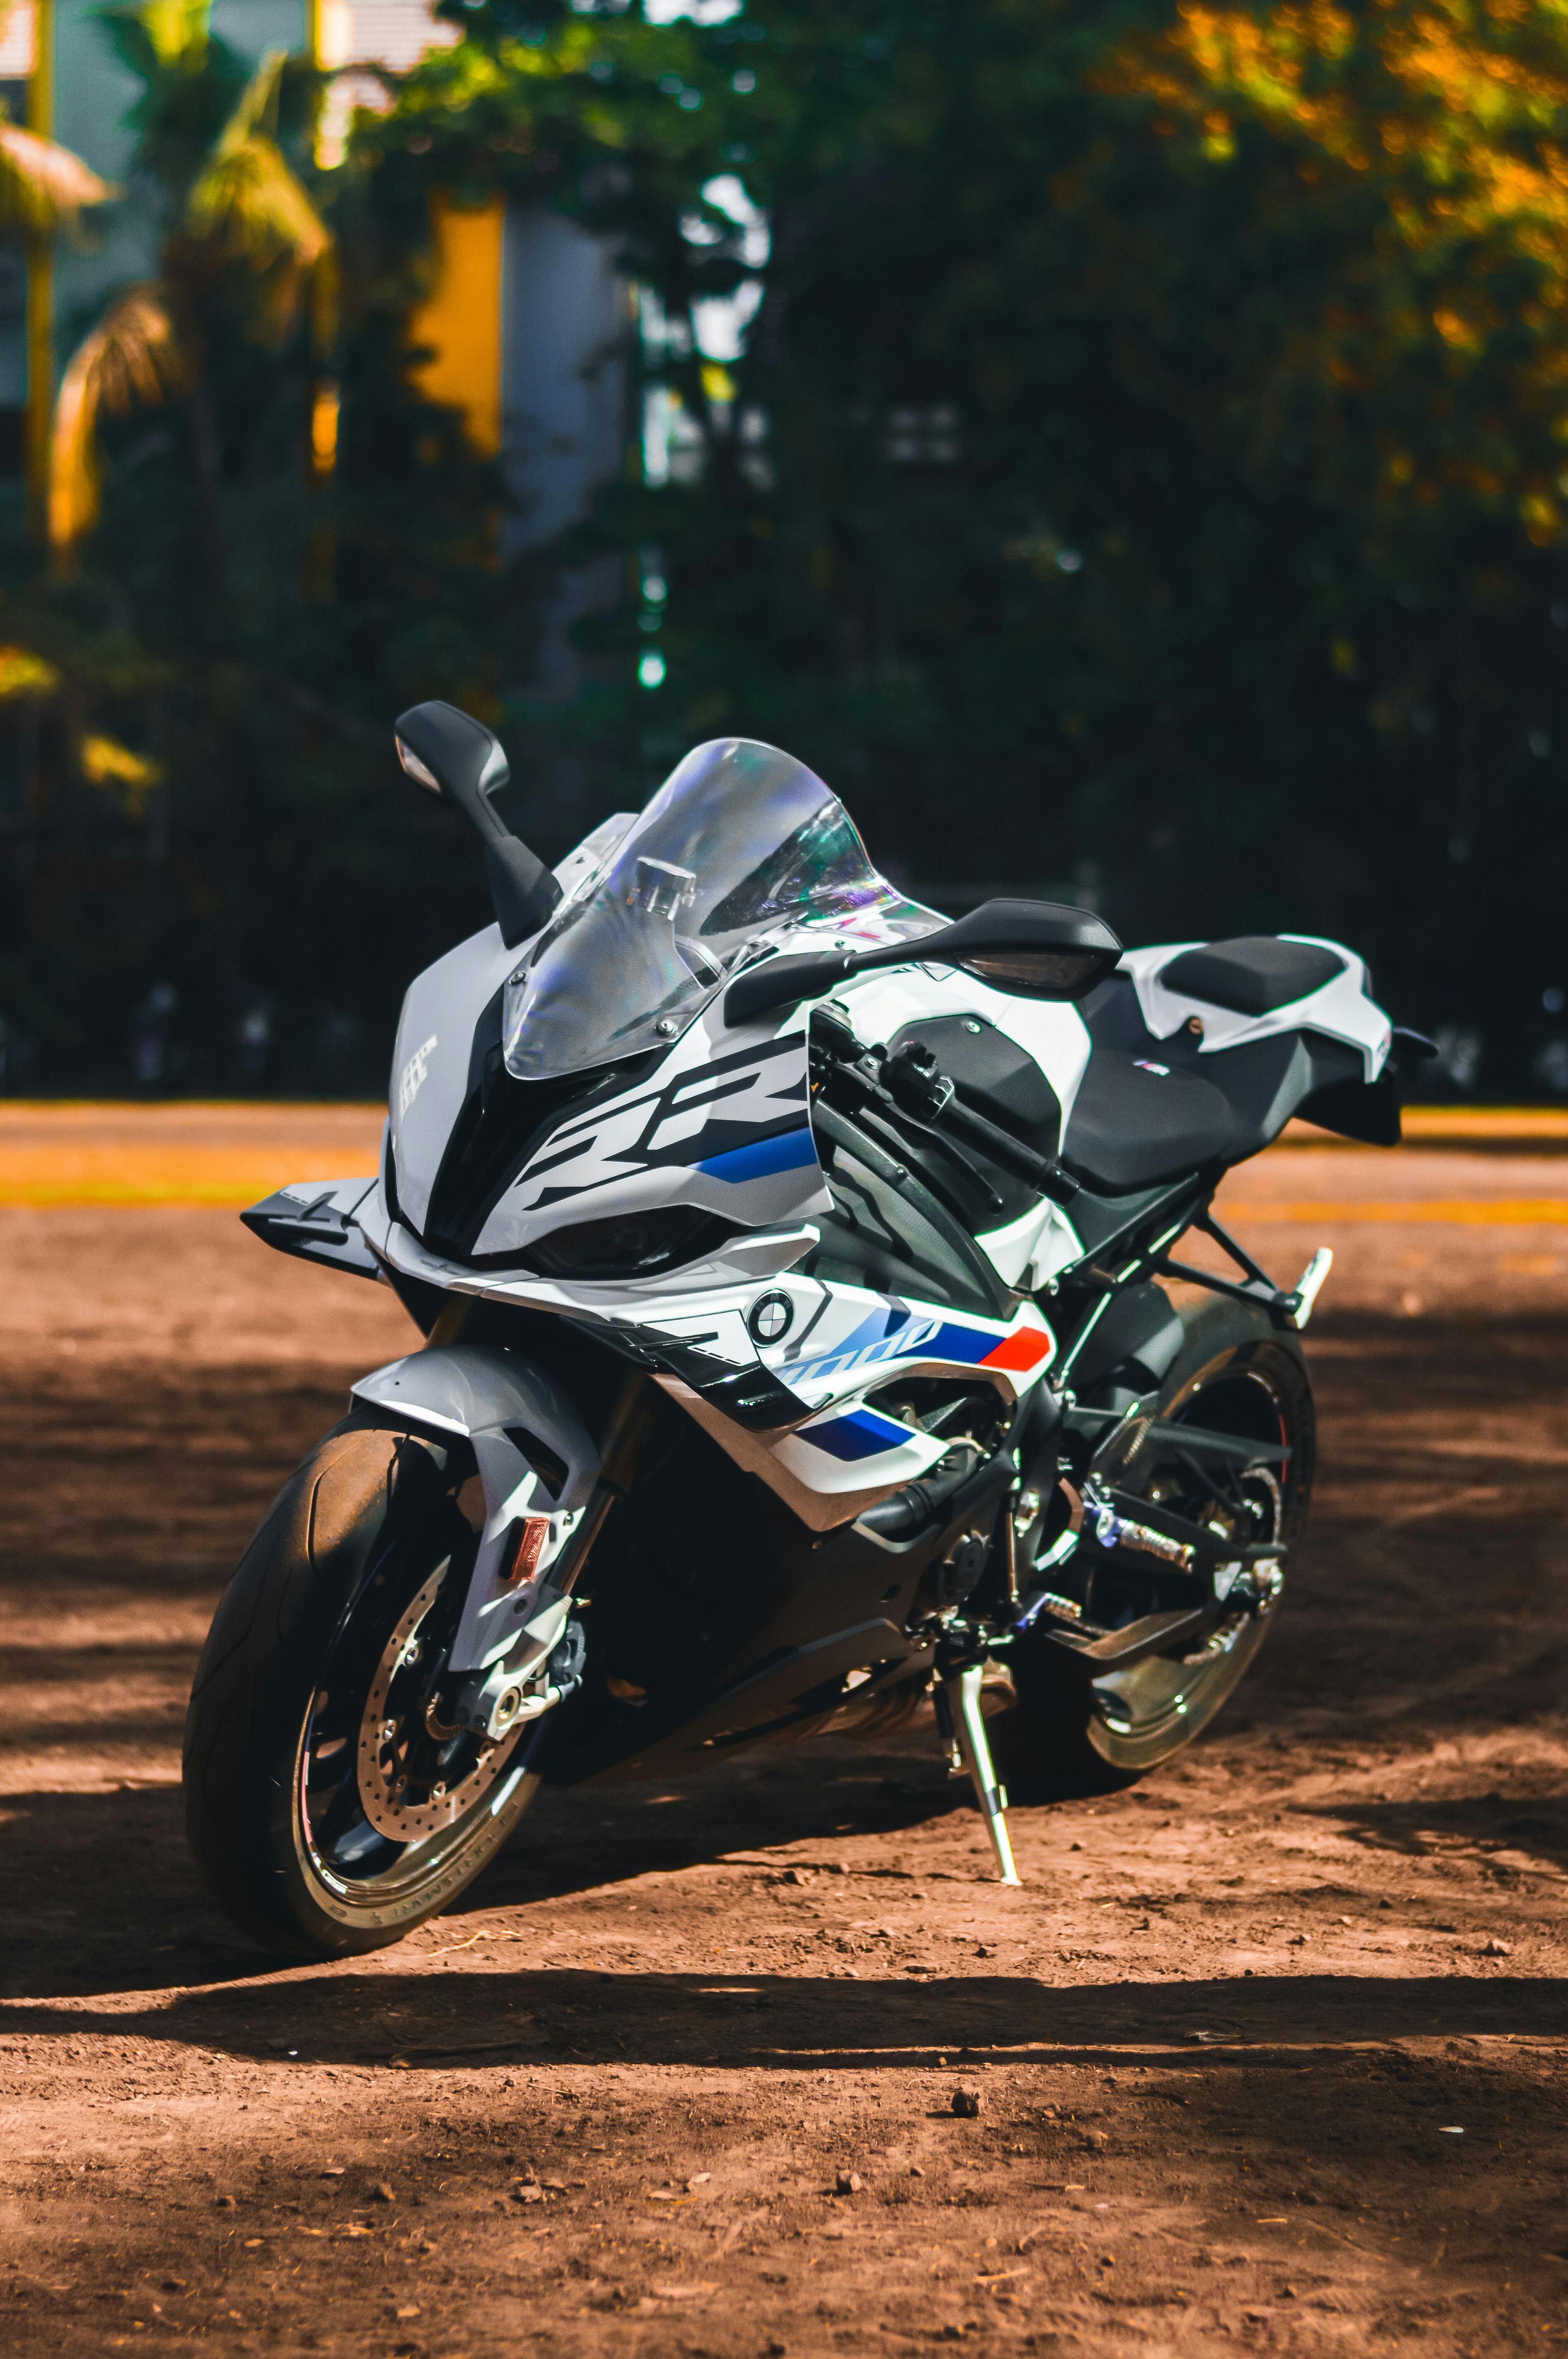 Details 75+ bmw bicycle wallpaper latest - in.daotaonec